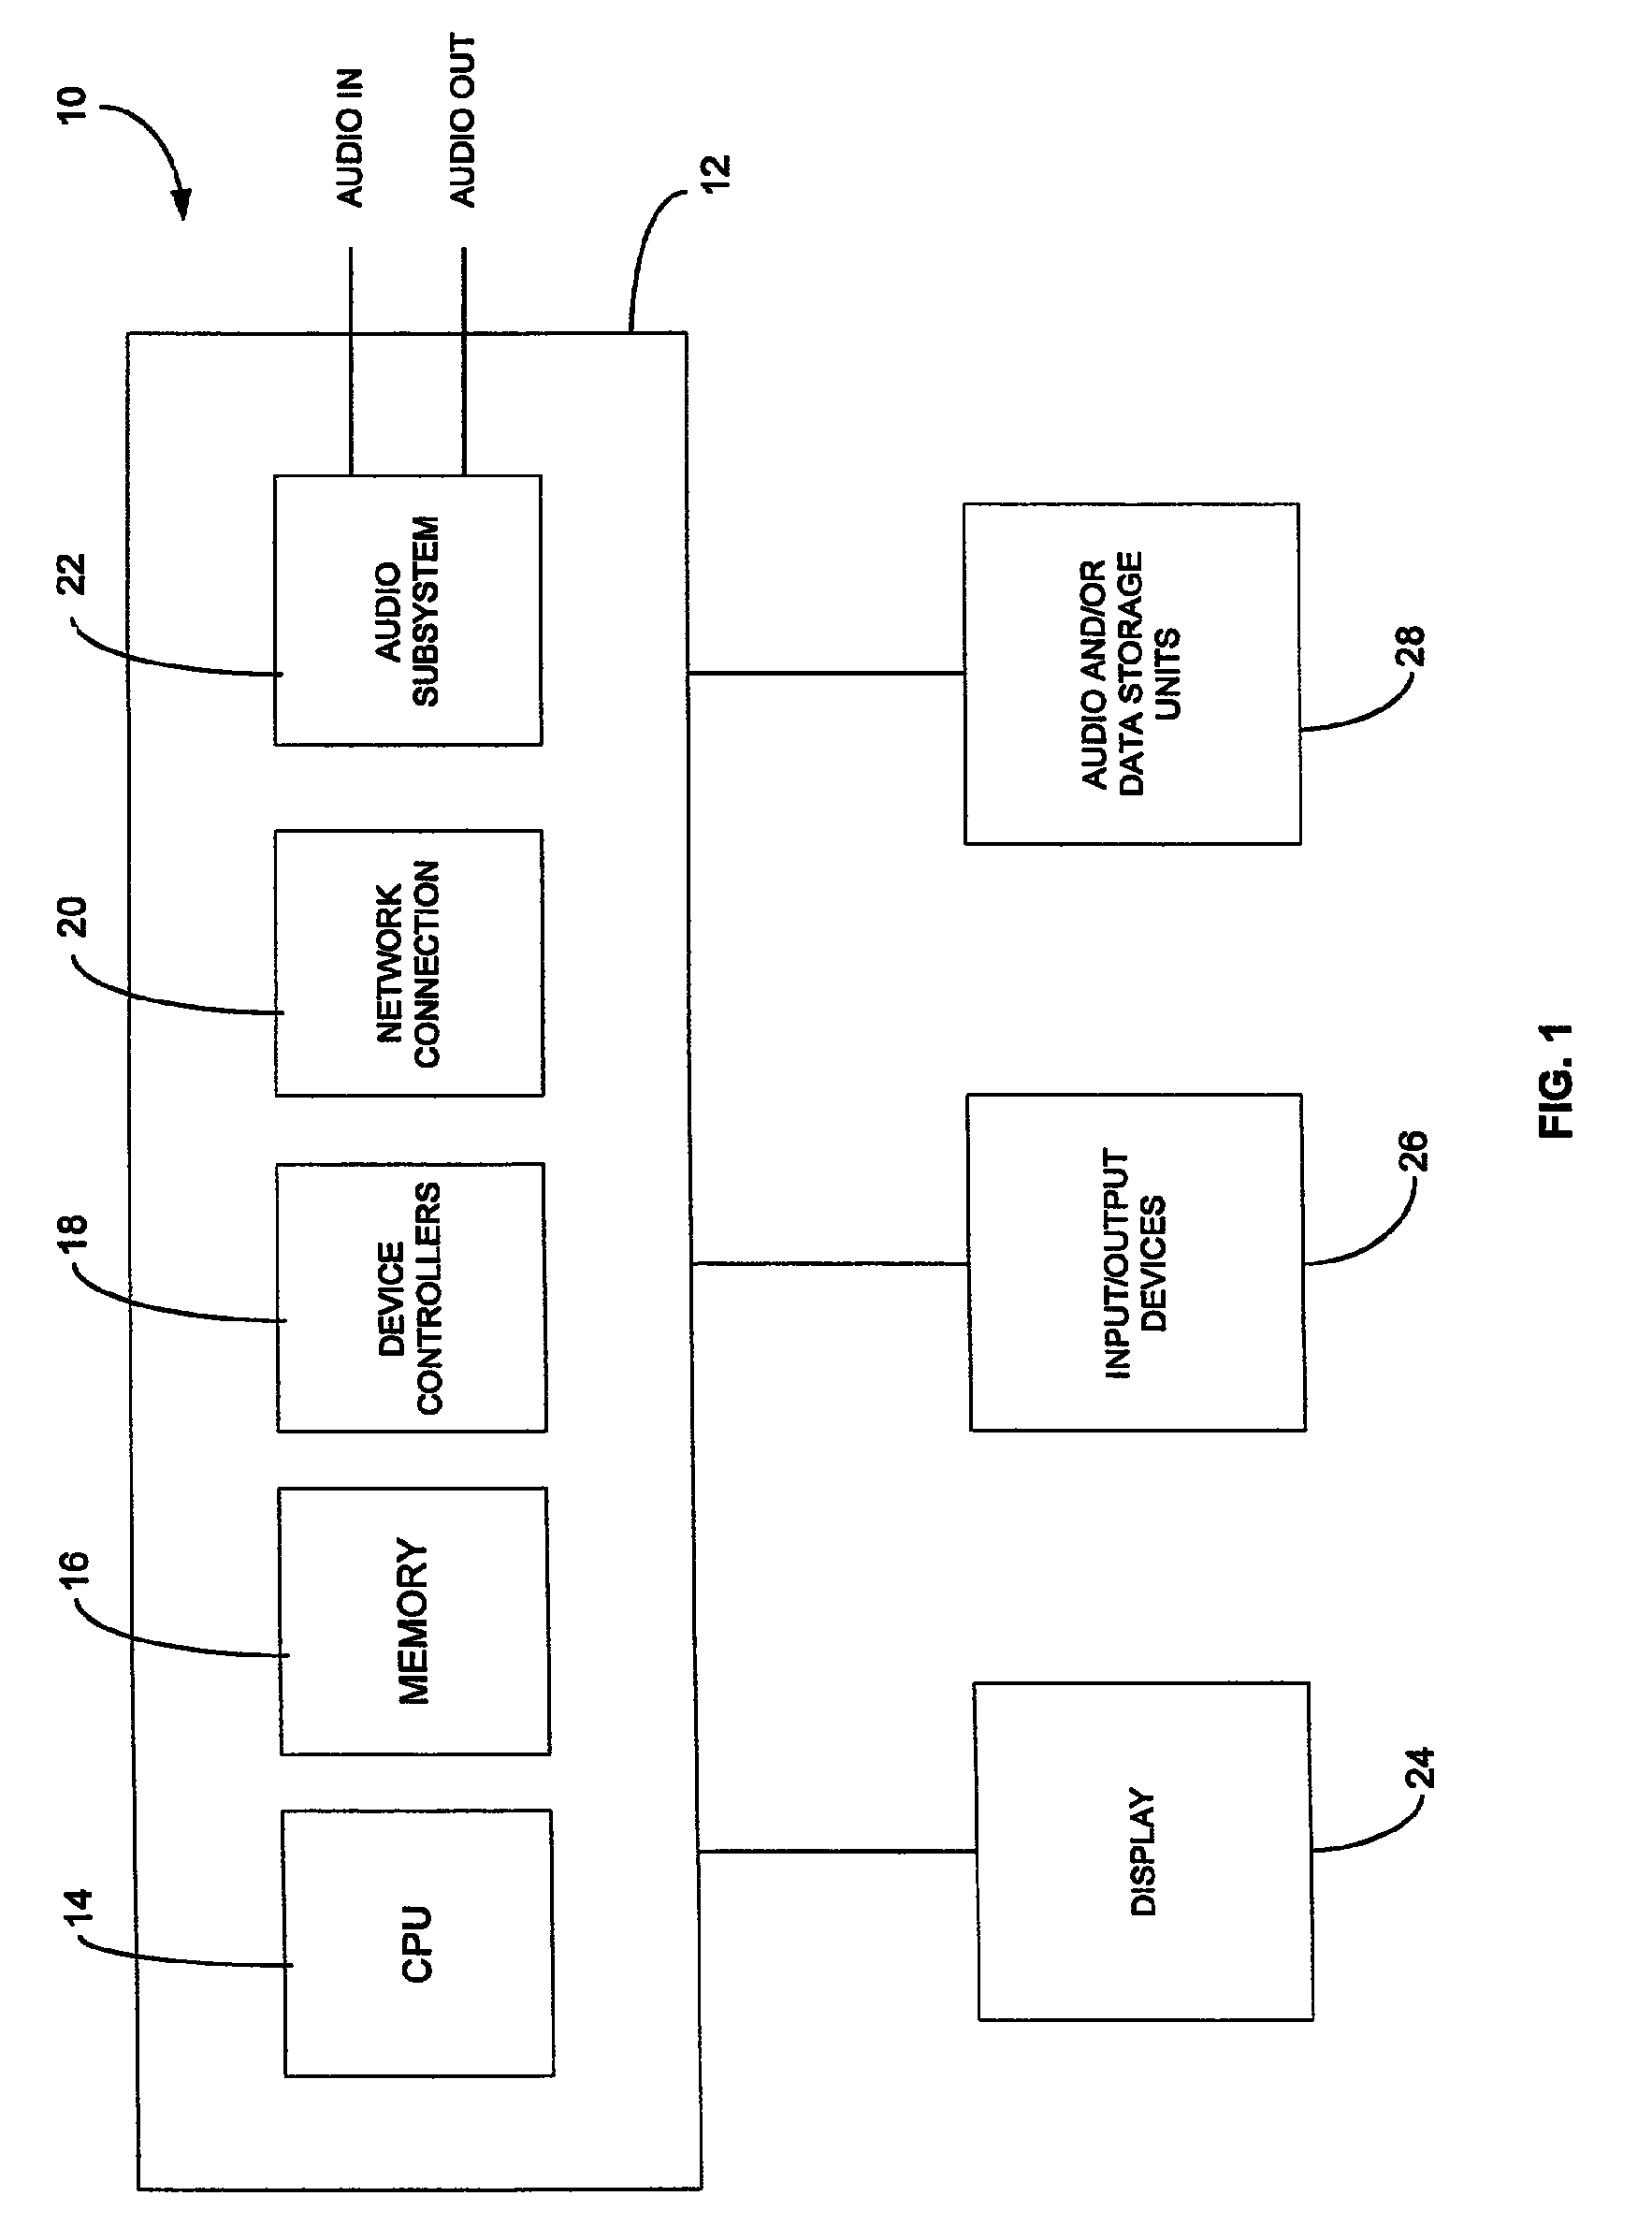 Method and apparatus for audio loudness and dynamics matching